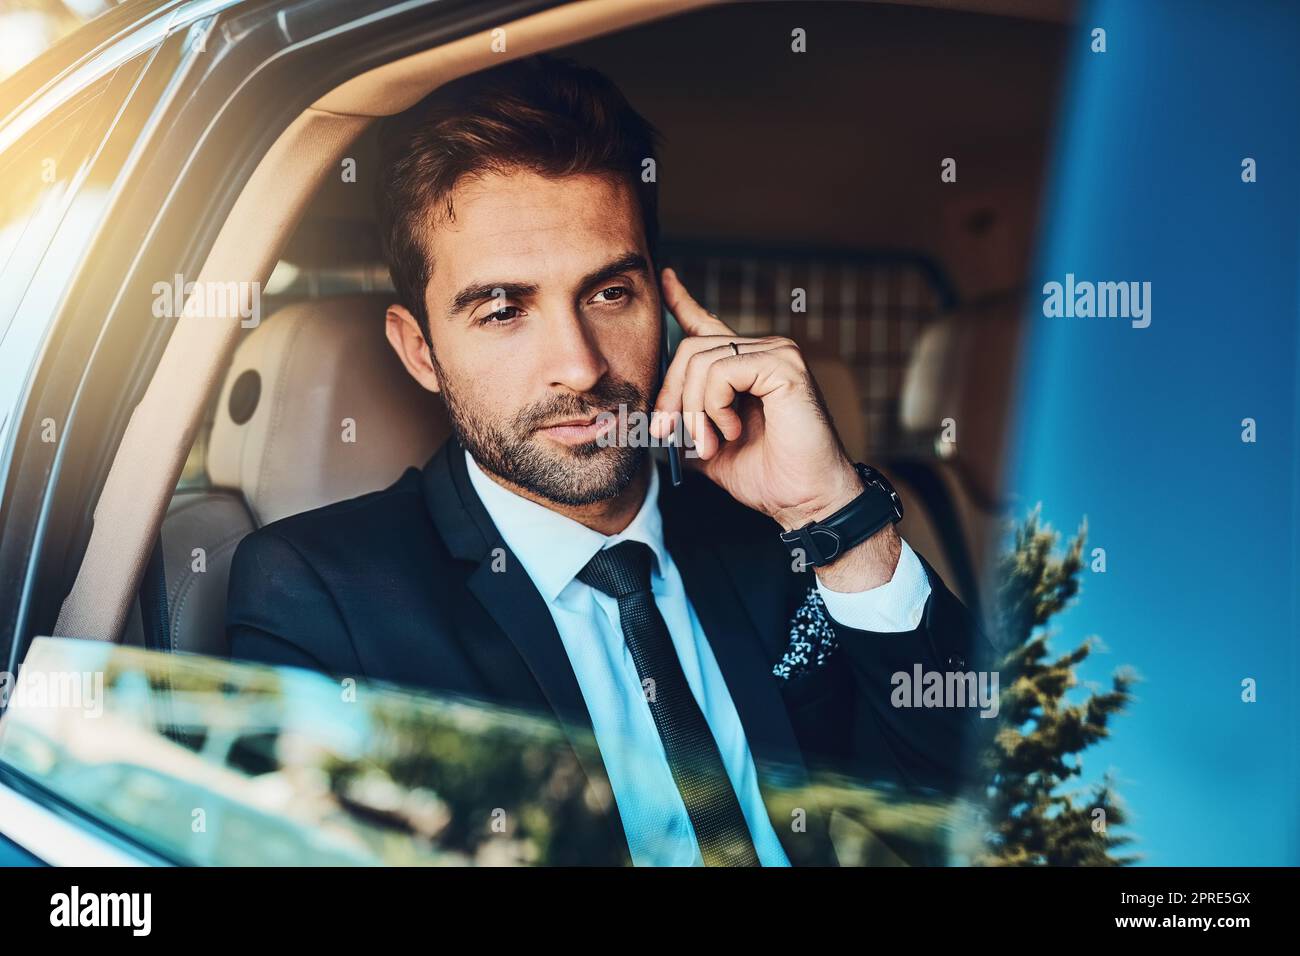 Calling the office to know whats happening. a handsome young corporate businessman on a call while commuting. Stock Photo